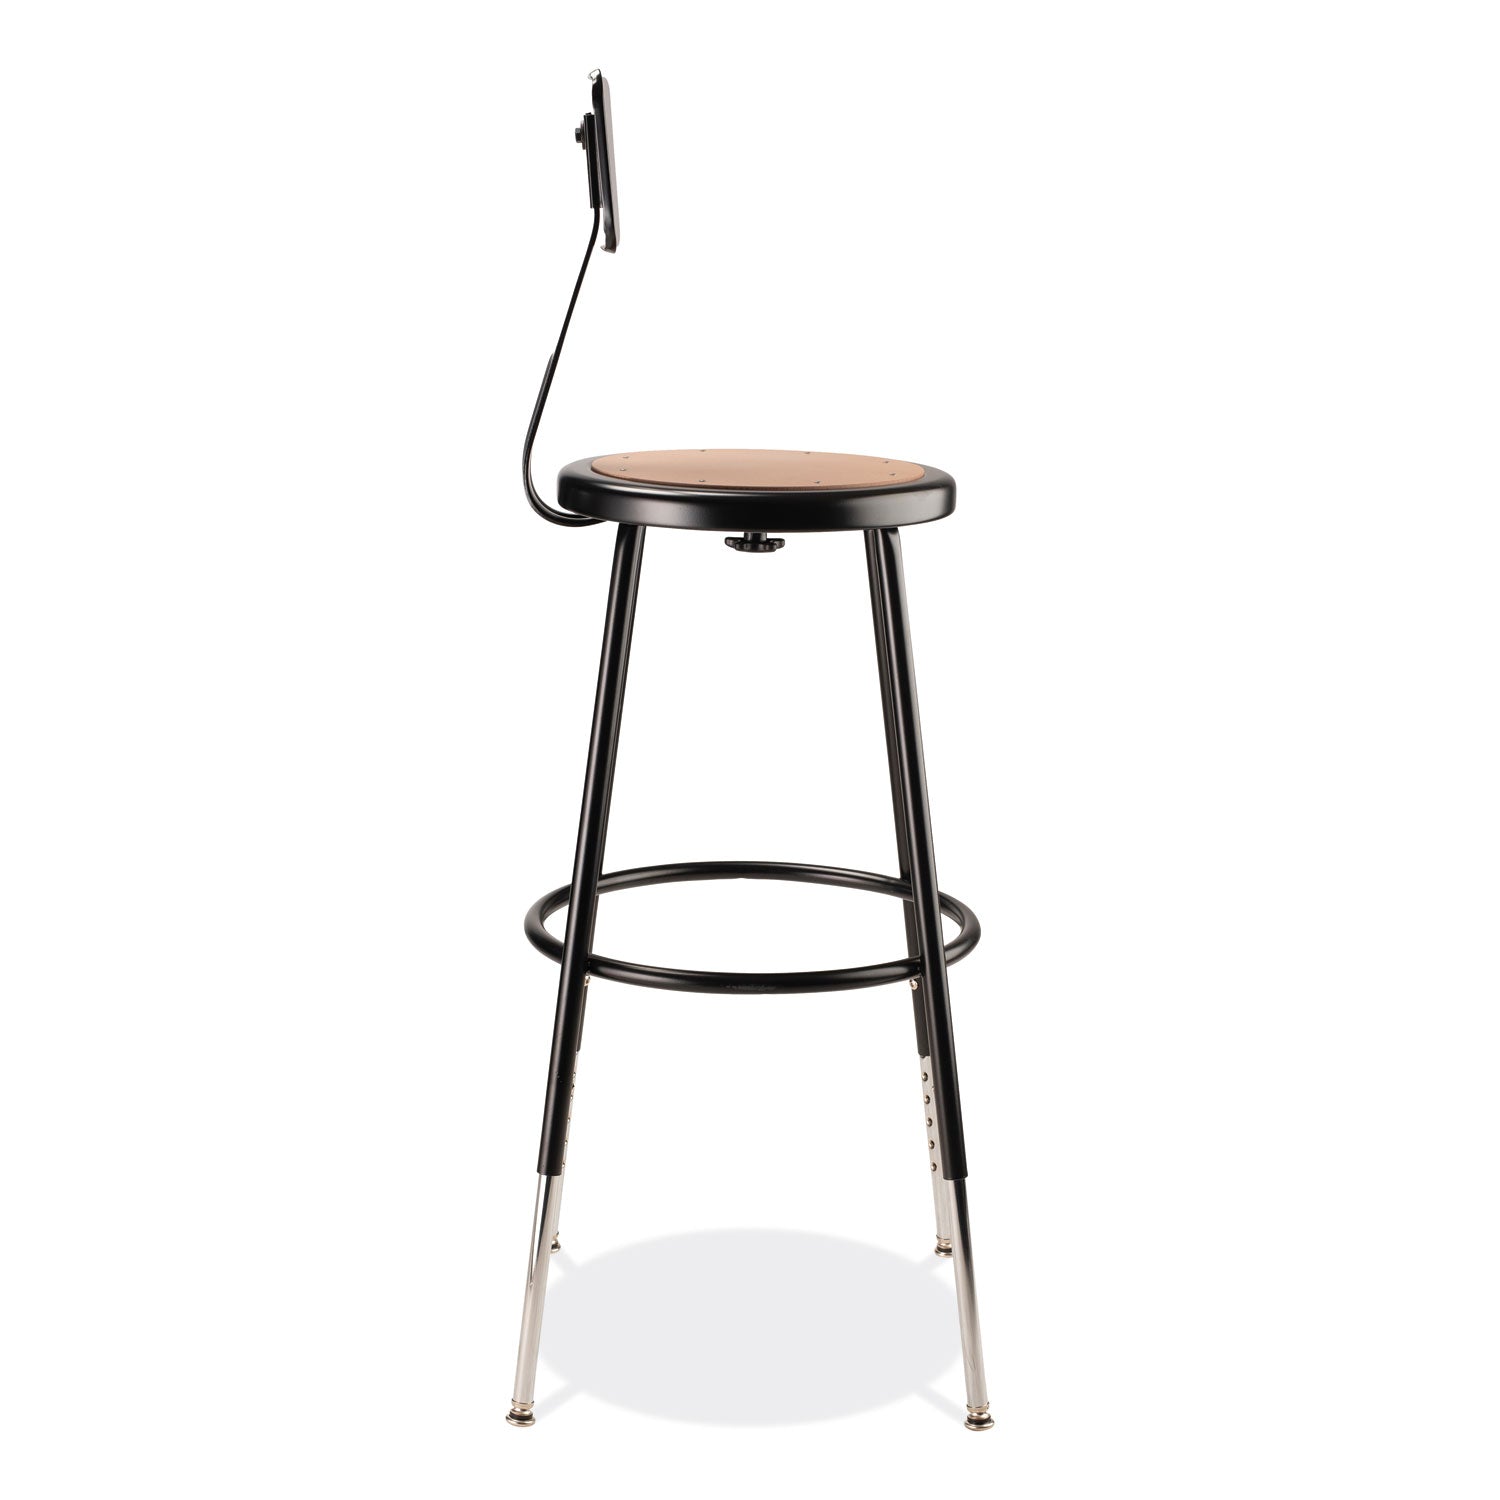 6200-series-25-33-height-adj-heavy-duty-stool-with-backrest-supports-500-lb-brown-seat-black-base-ships-in-1-3-bus-days_nps6224hb10 - 3